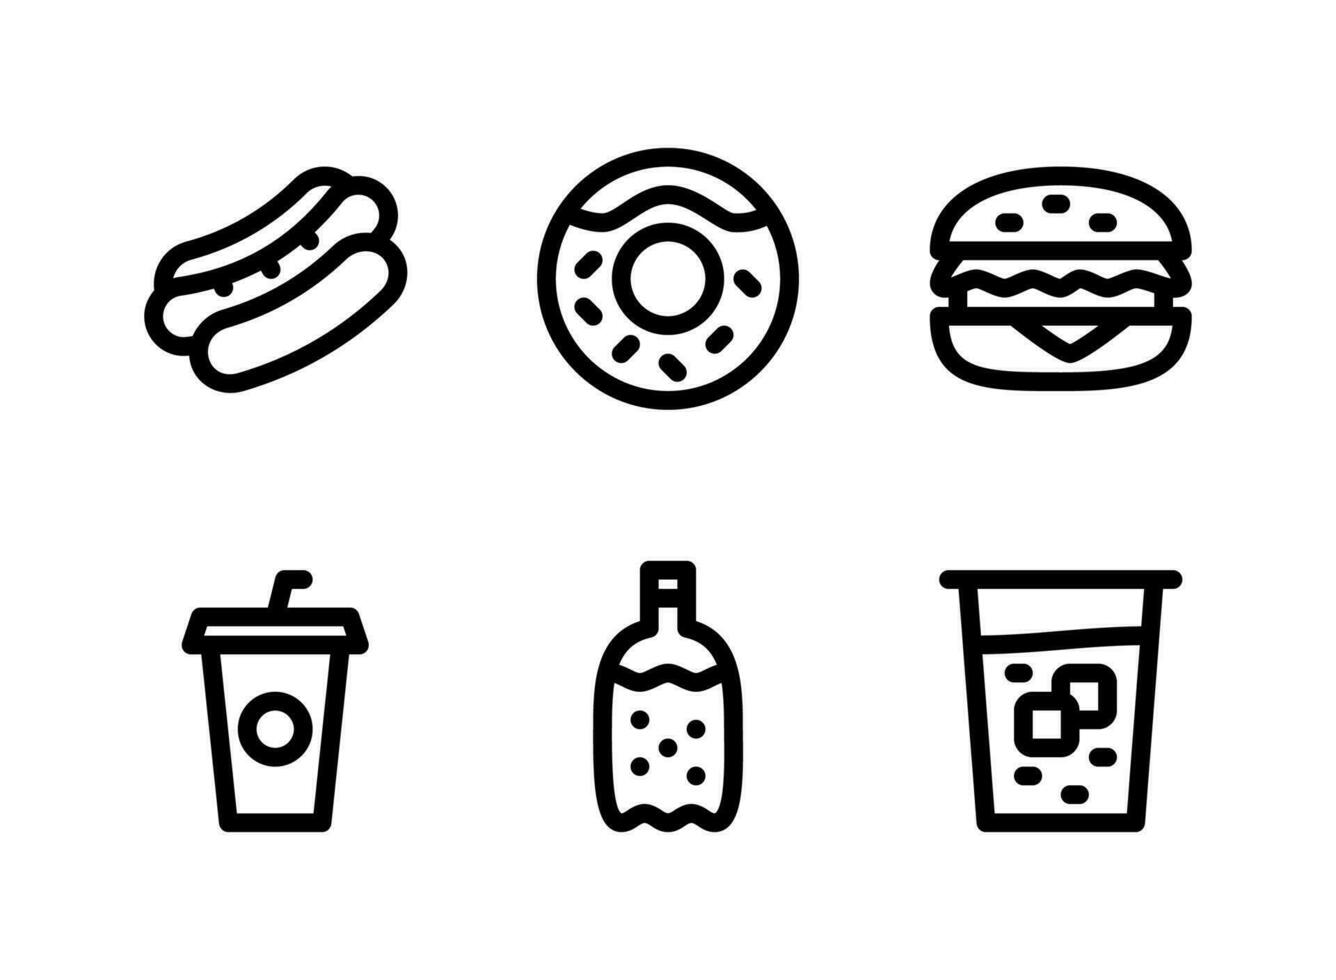 Simple Set of Food and Drink Related Vector Line Icons. Contains Icons as Hotdog, Doughnut, Burger and more.